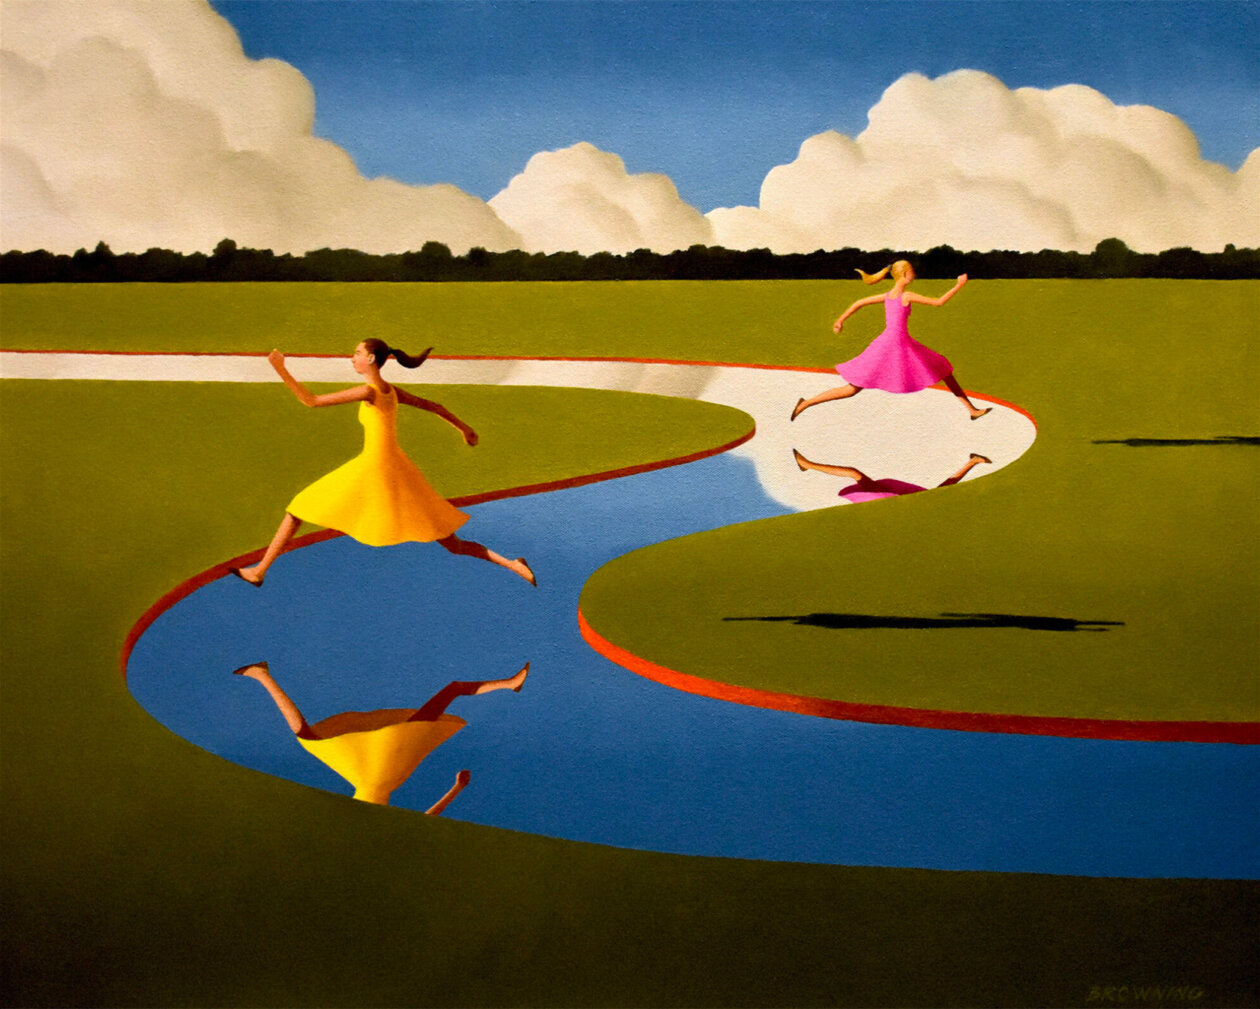 Deam Like Contemporary Paintings By Rob Browning (1)